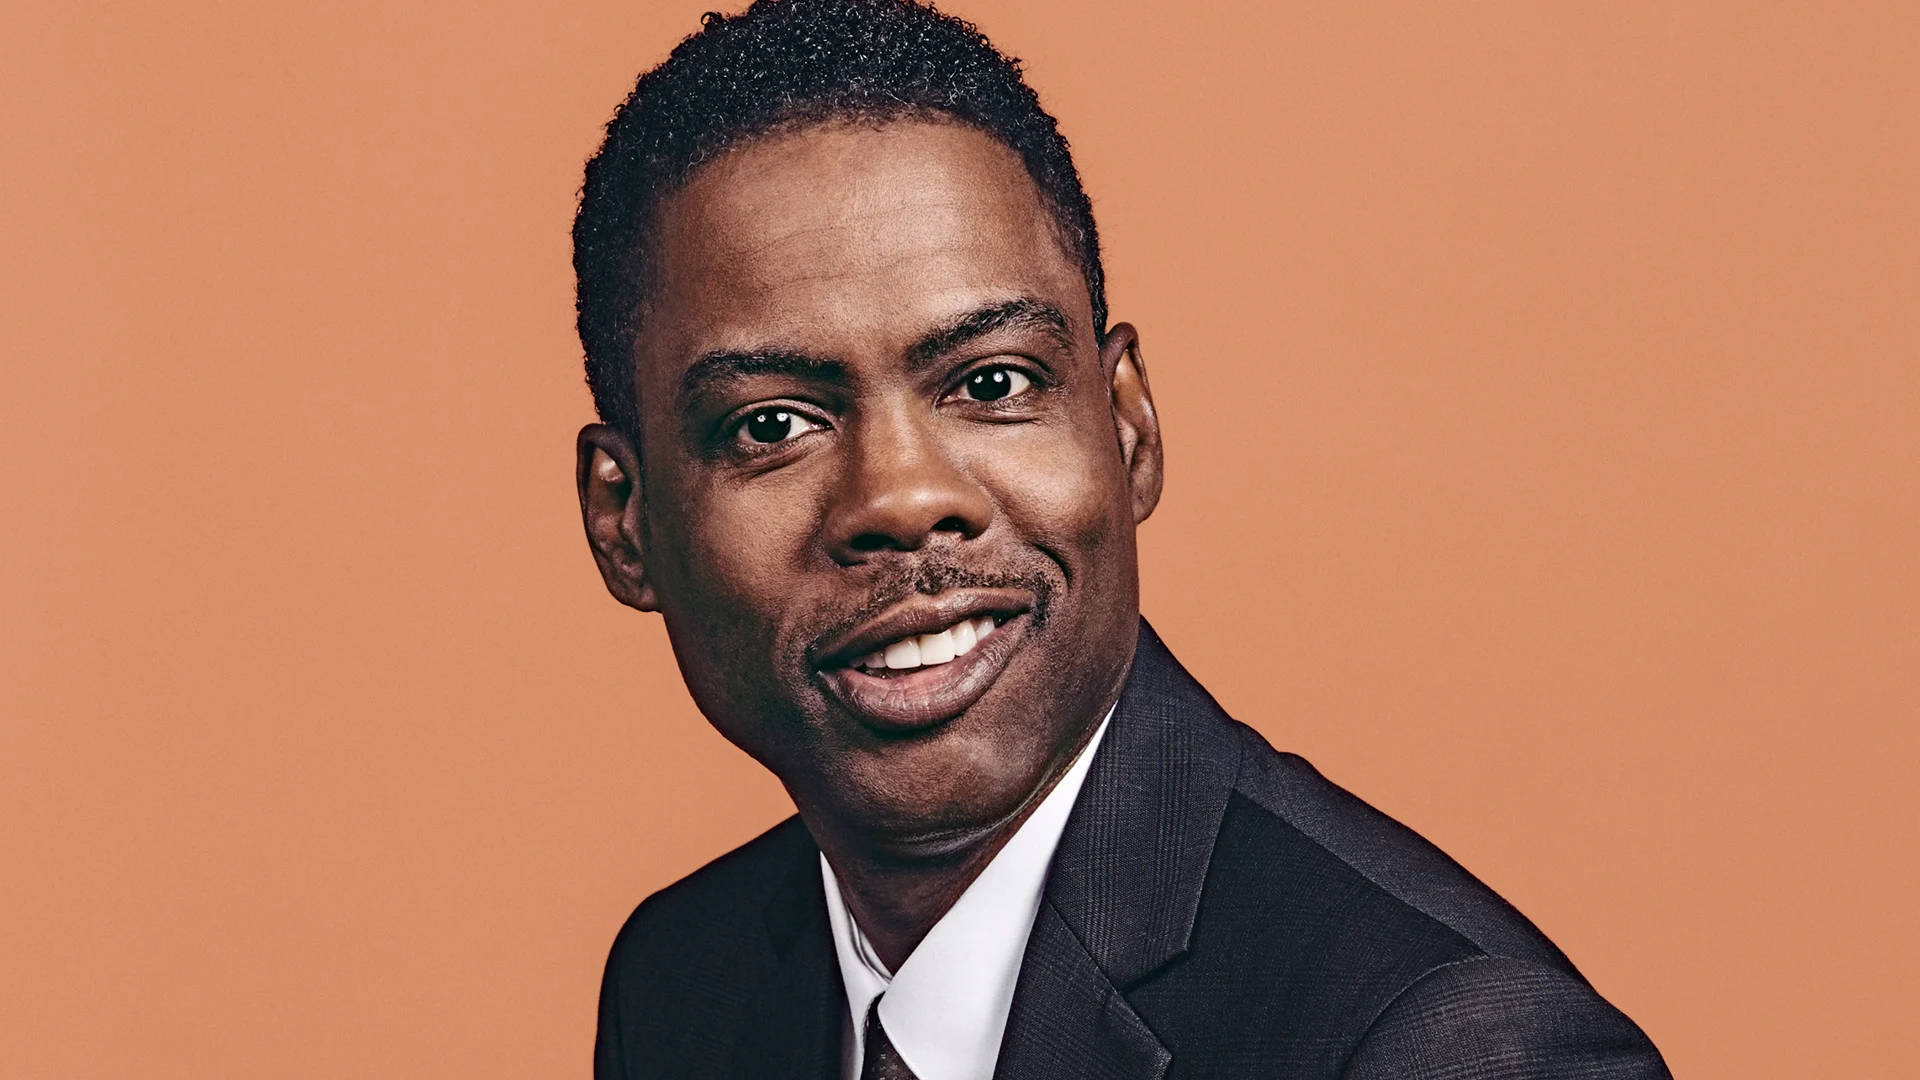 Chris Rock In Thought Background